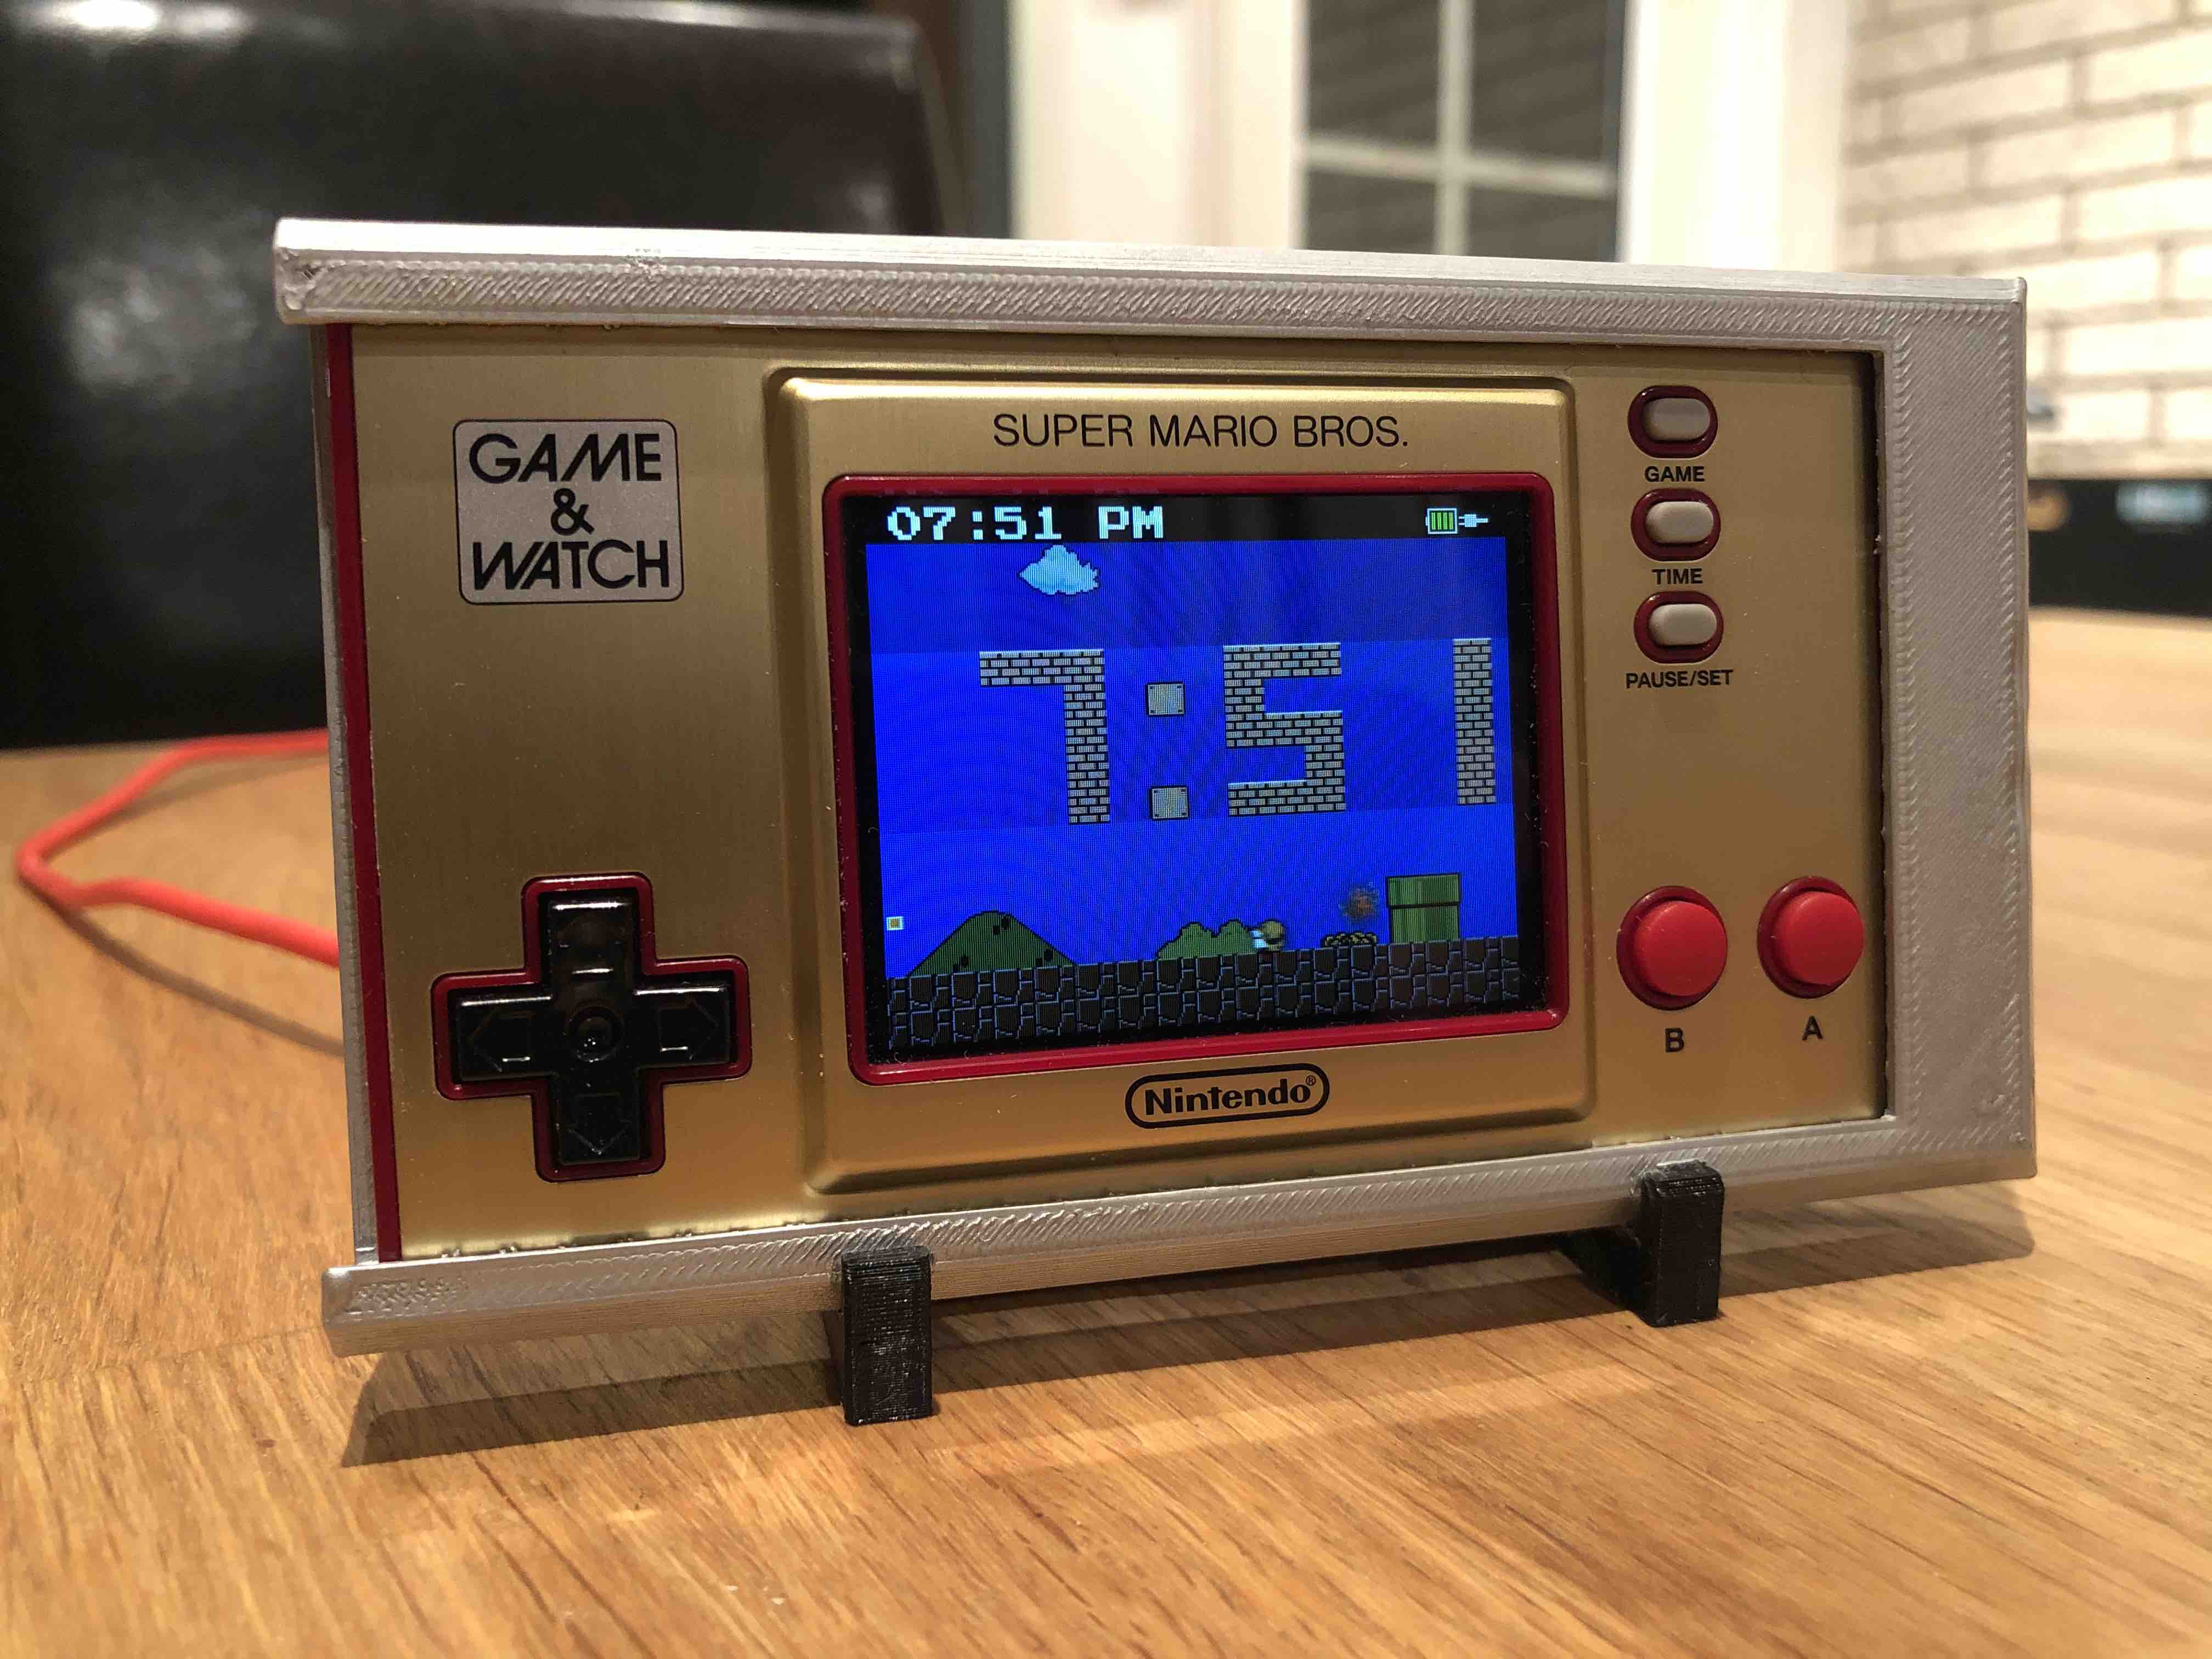 Game and Watch Super Mario Bros. - Docking Station